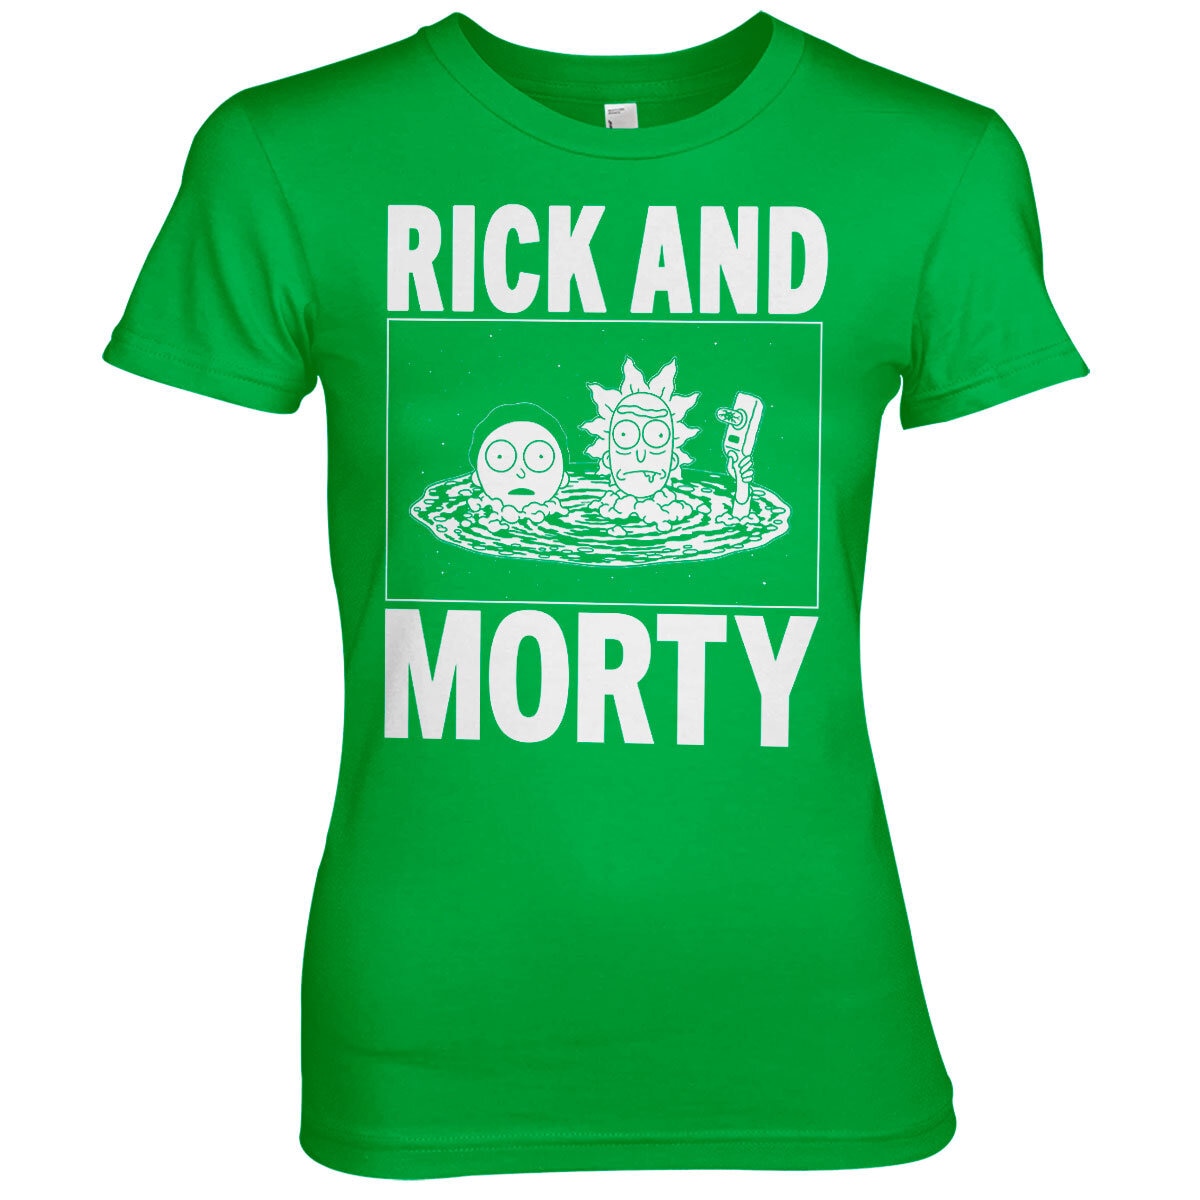 Rock And Morty Girly Tee